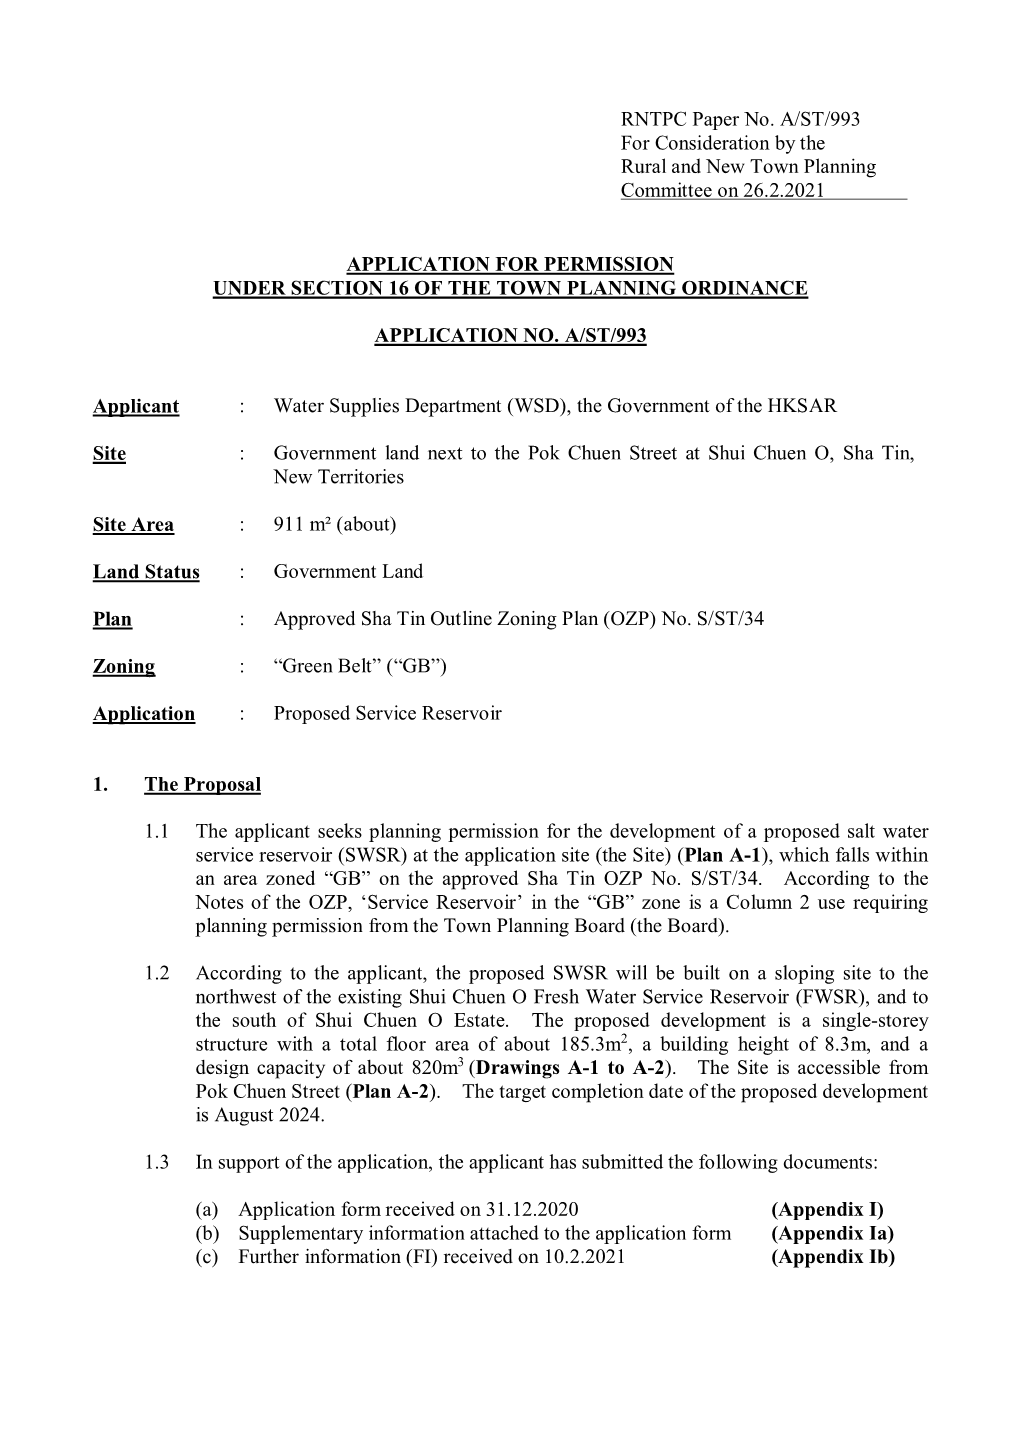 RNTPC Paper No. A/ST/993 for Consideration by the Rural and New Town Planning Committee on 26.2.2021 APPLICATION for PERMISSION